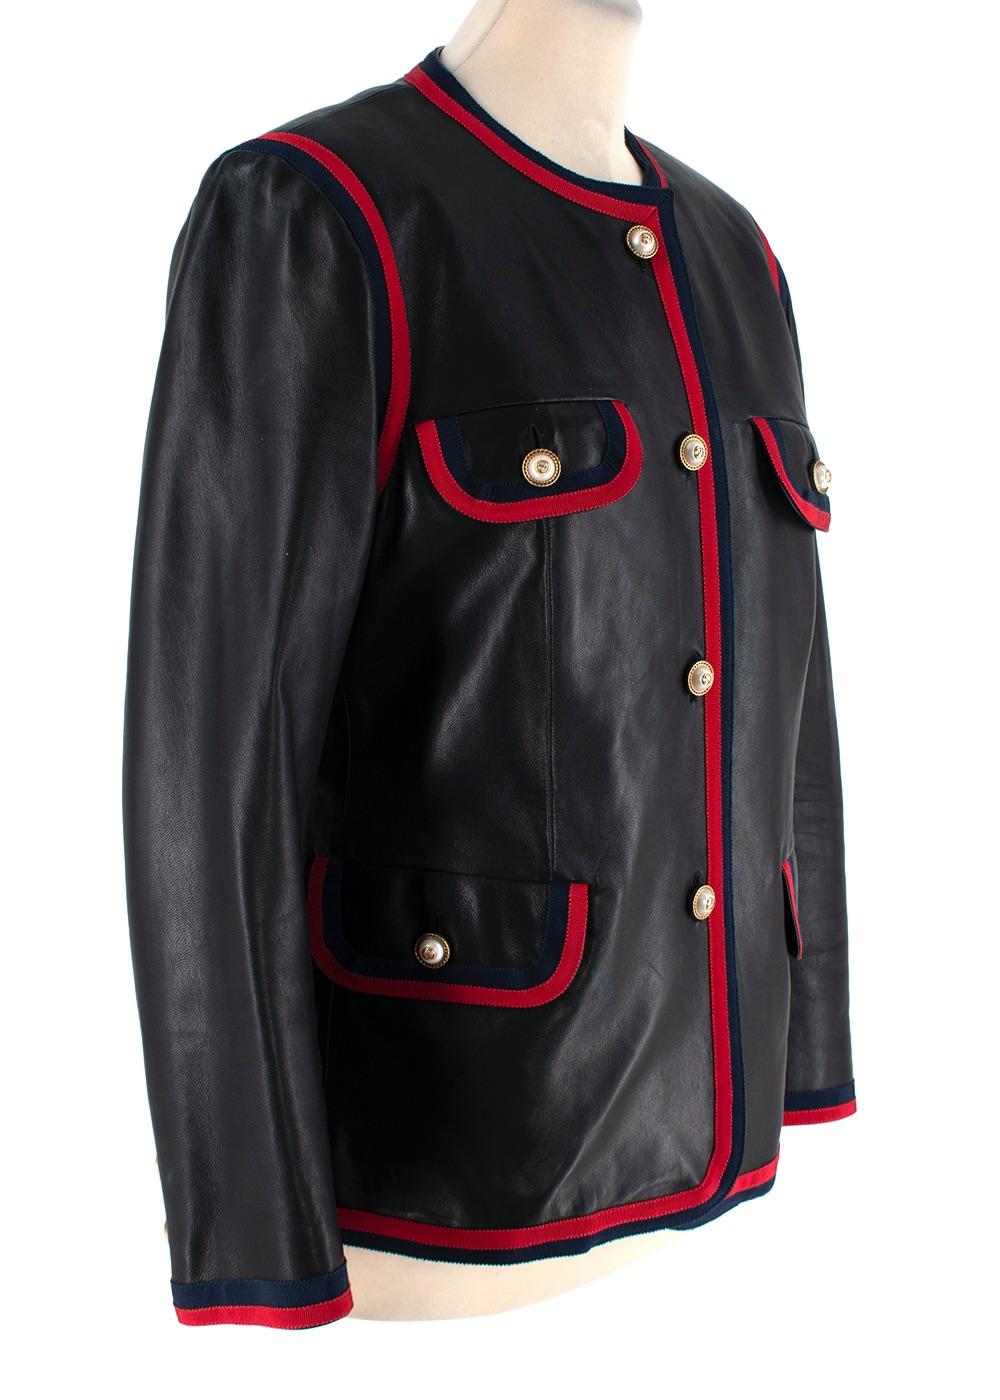 Black Leather Collarless Web-Trimmed Jacket

- Signature collarless style, rendered in a supple black leather trimmed with red and blue webbing
- Button up closure embellished in faux pearls and gold-tone chain hardware
- 4 front flap pockets
-